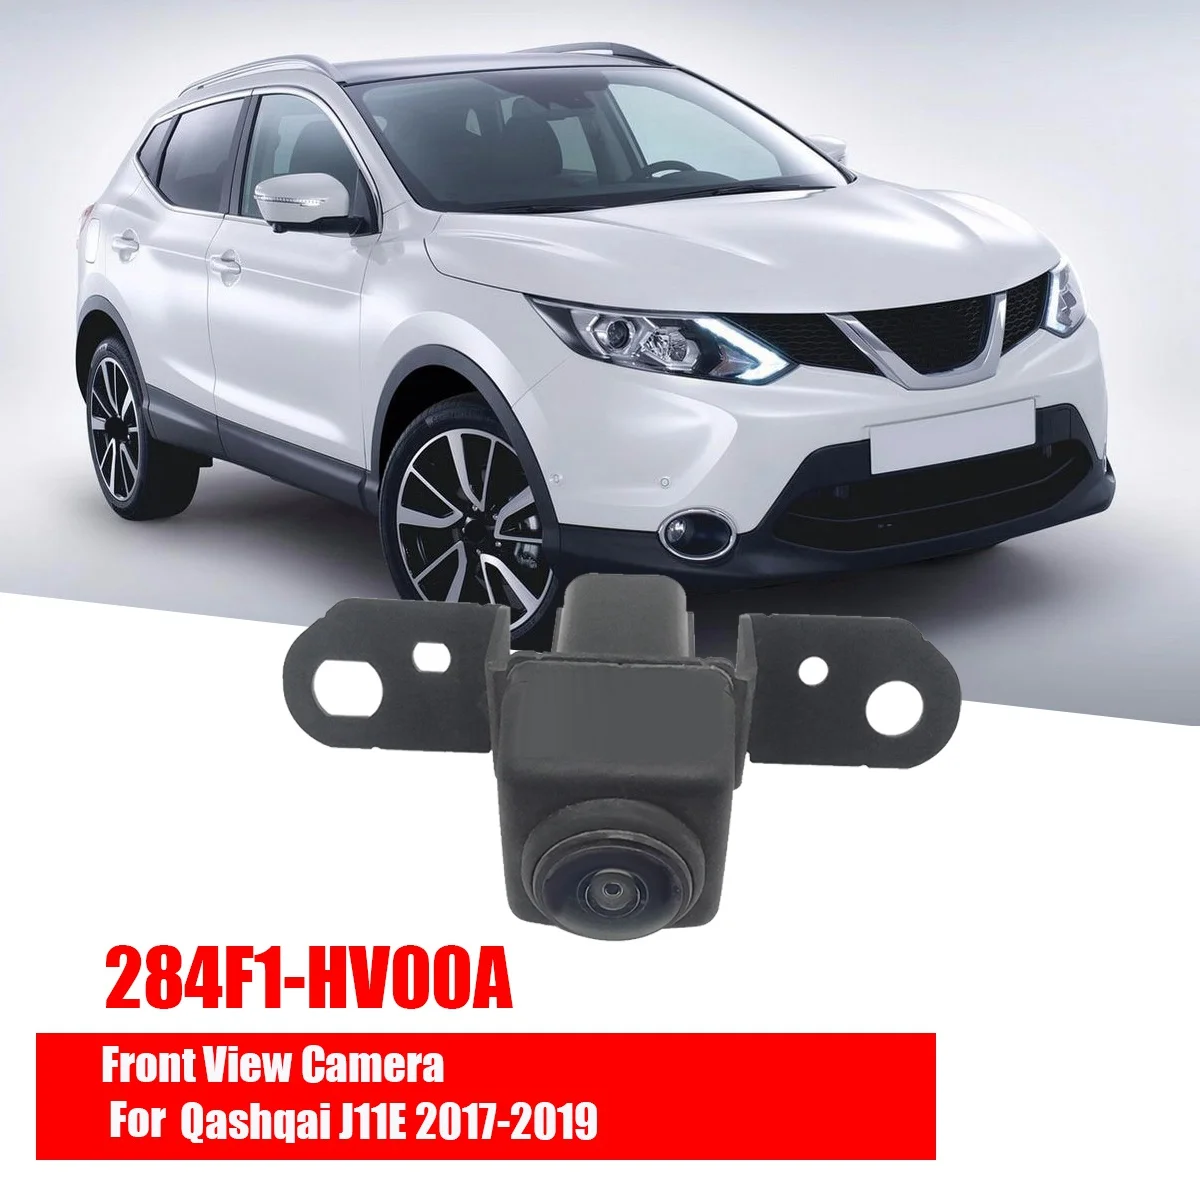 

284F1-HV00A Front View Camera for Nissan Qashqai 1500 Series Diesel 2017-2019 Assist Reverse Parking Camera 284F1HV00A